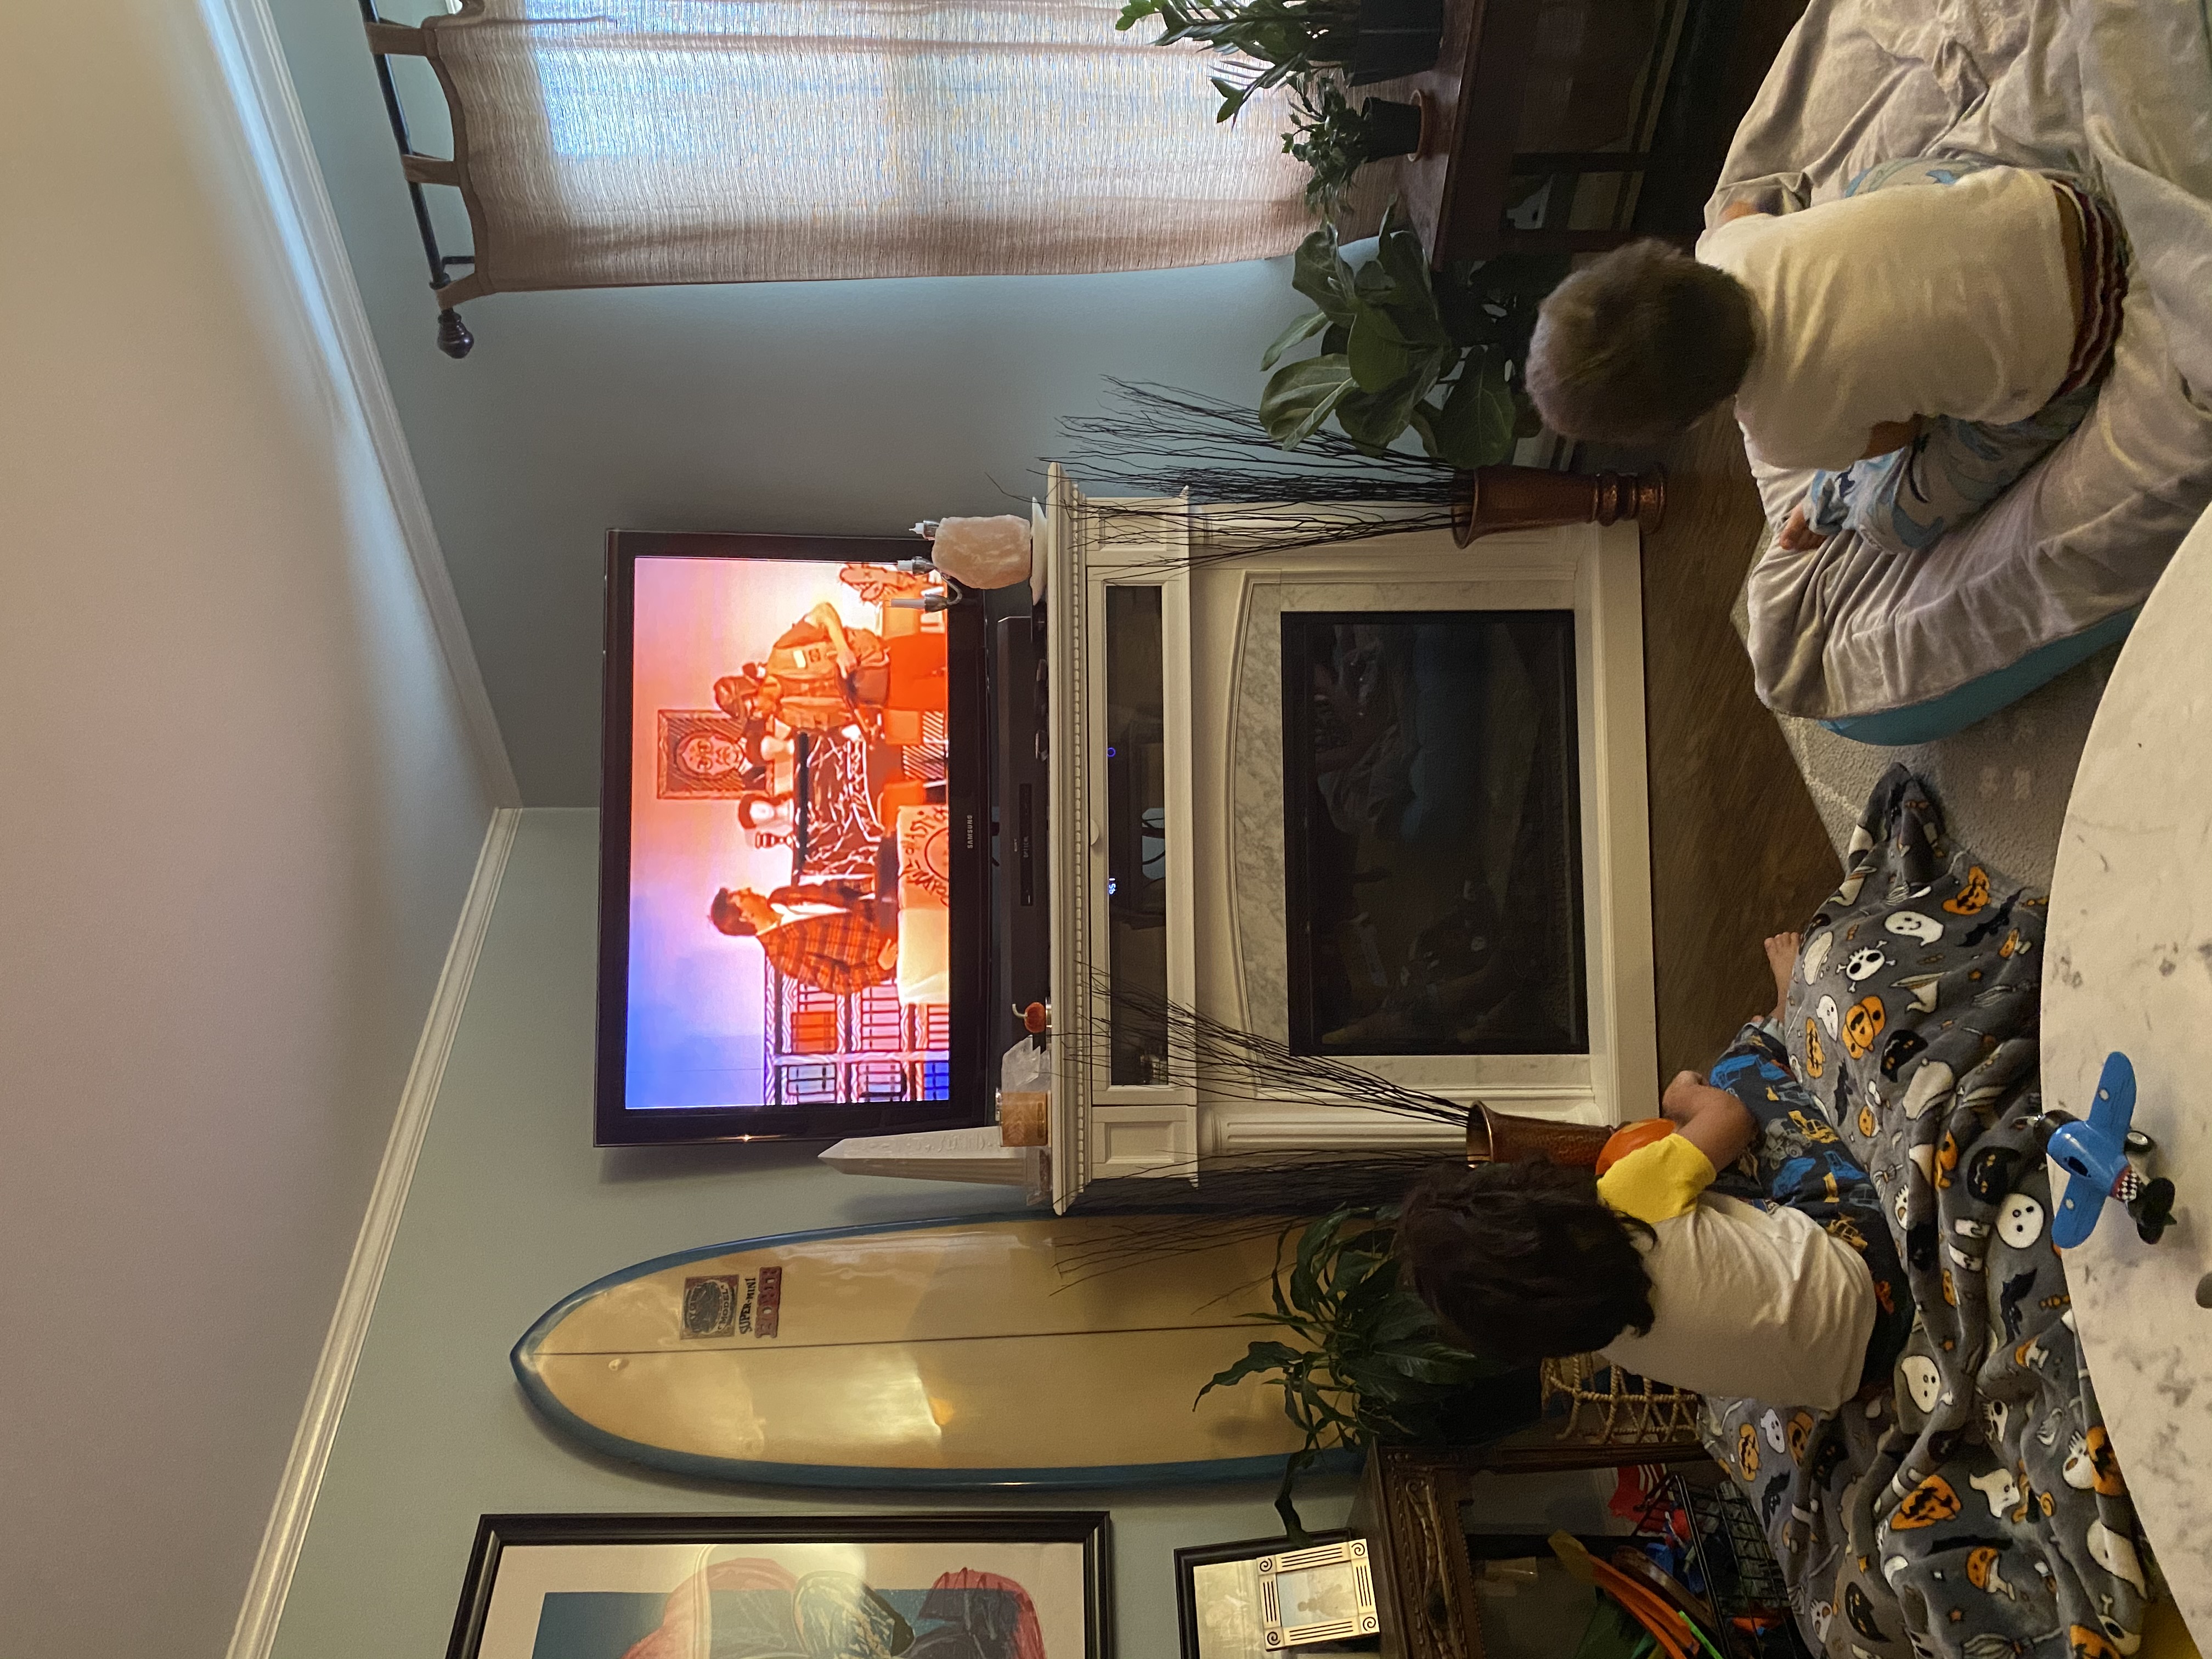 Photo of 3 and 5 year olds watching the livestream on a television, while they sit on the floor of a beach house (based on the surfboard next to the television)